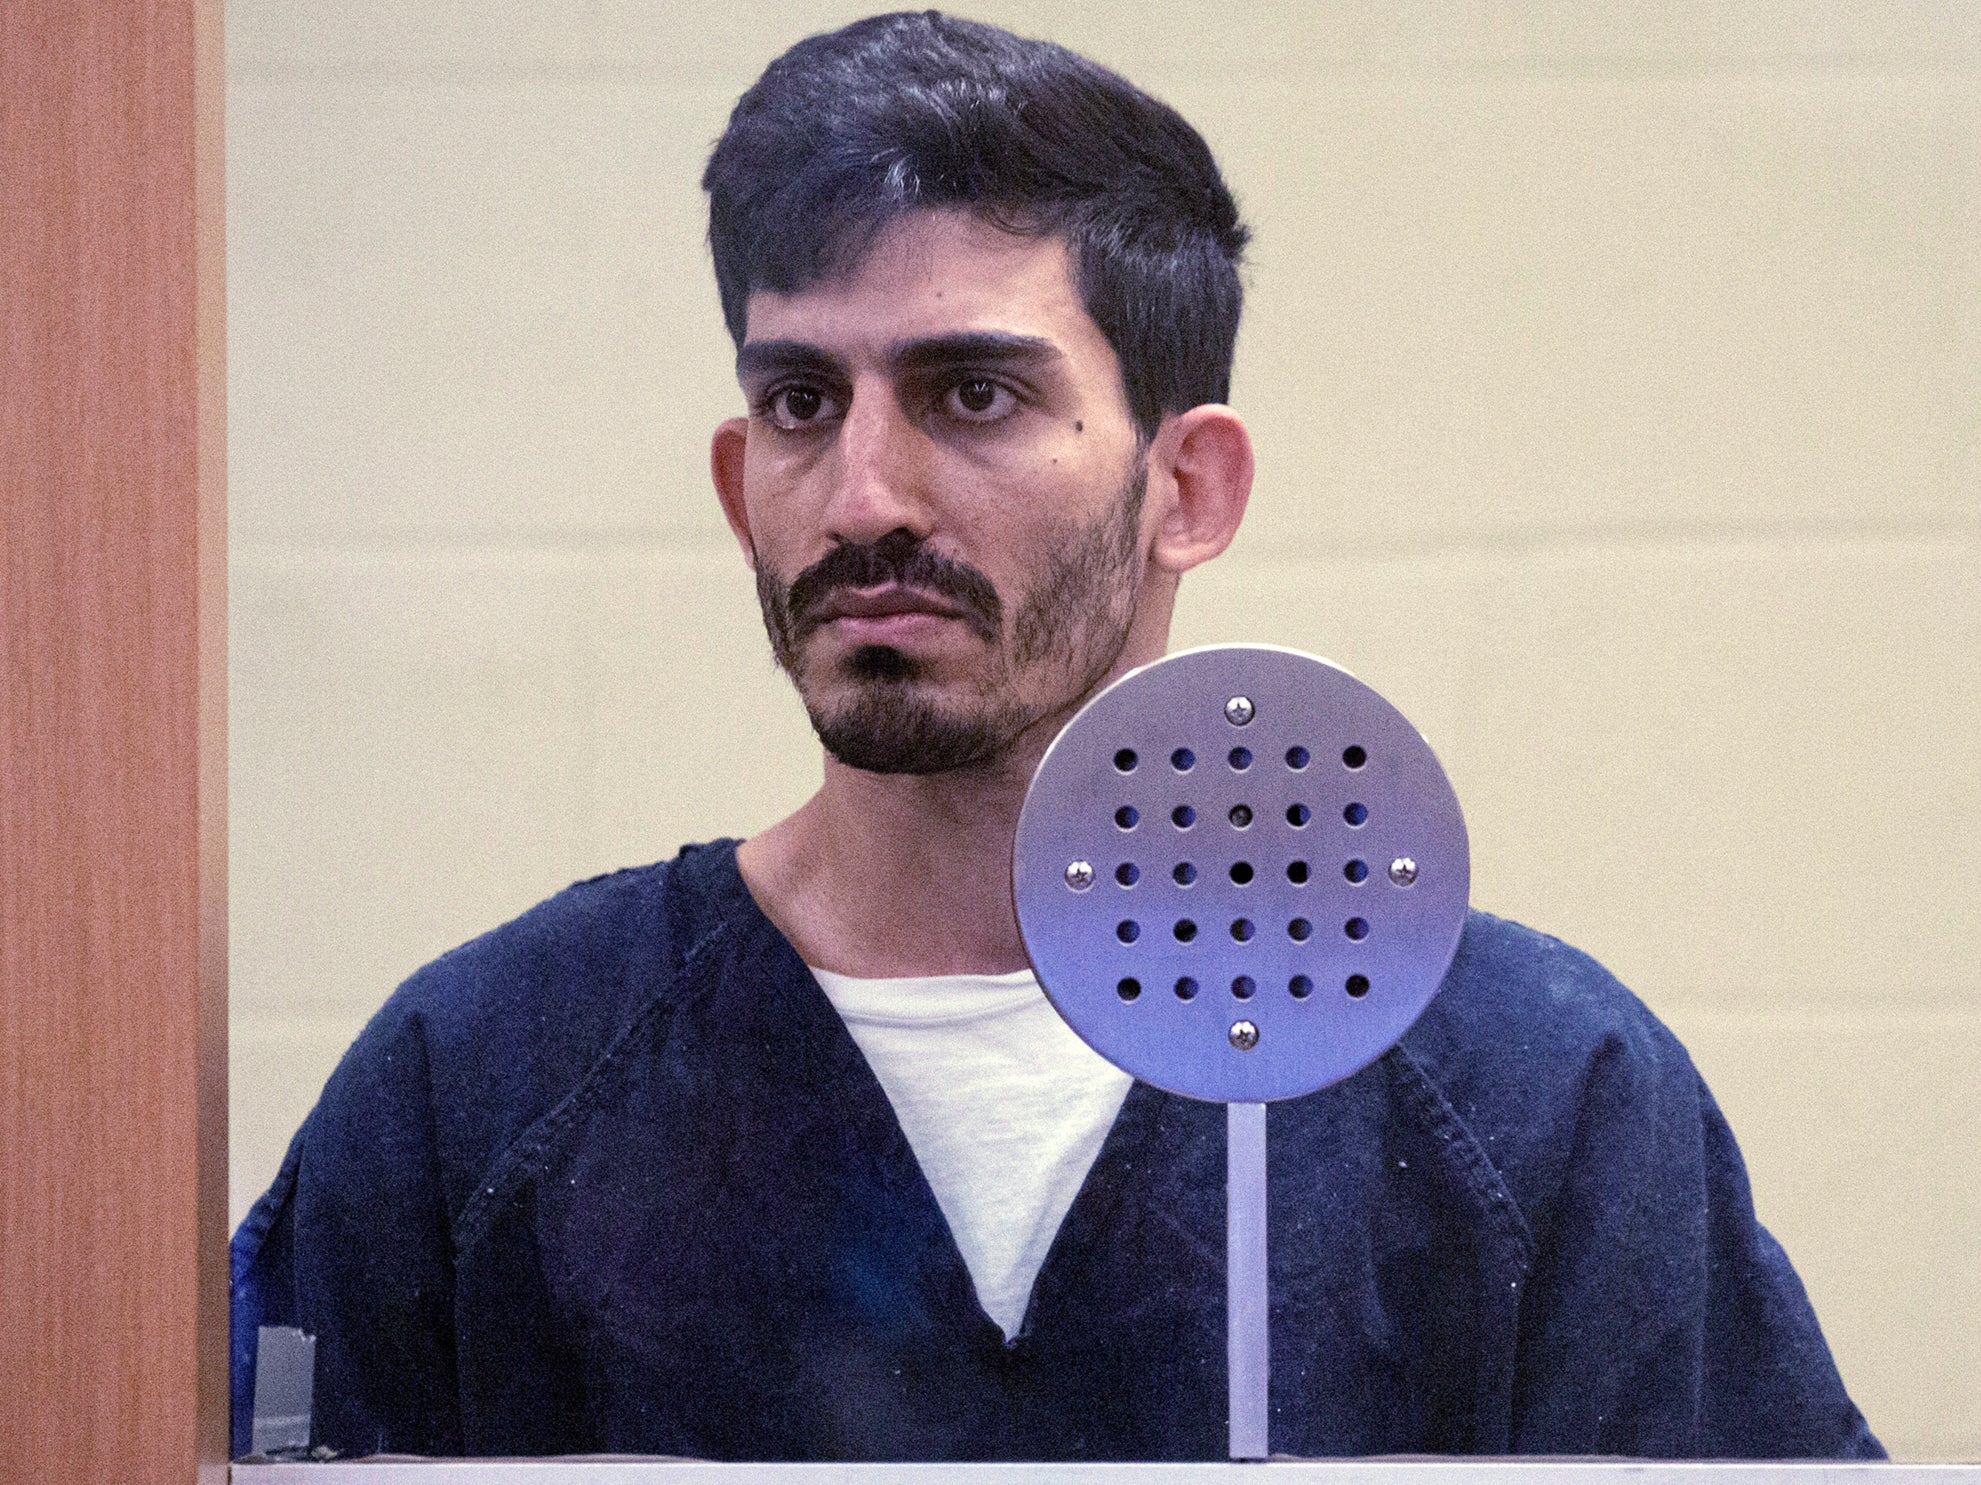 Ali Abulaban, 29, stands during his arraignment for a double homicide at the San Diego Central Courthouse on Monday, Oct. 25, 2021 in San Diego